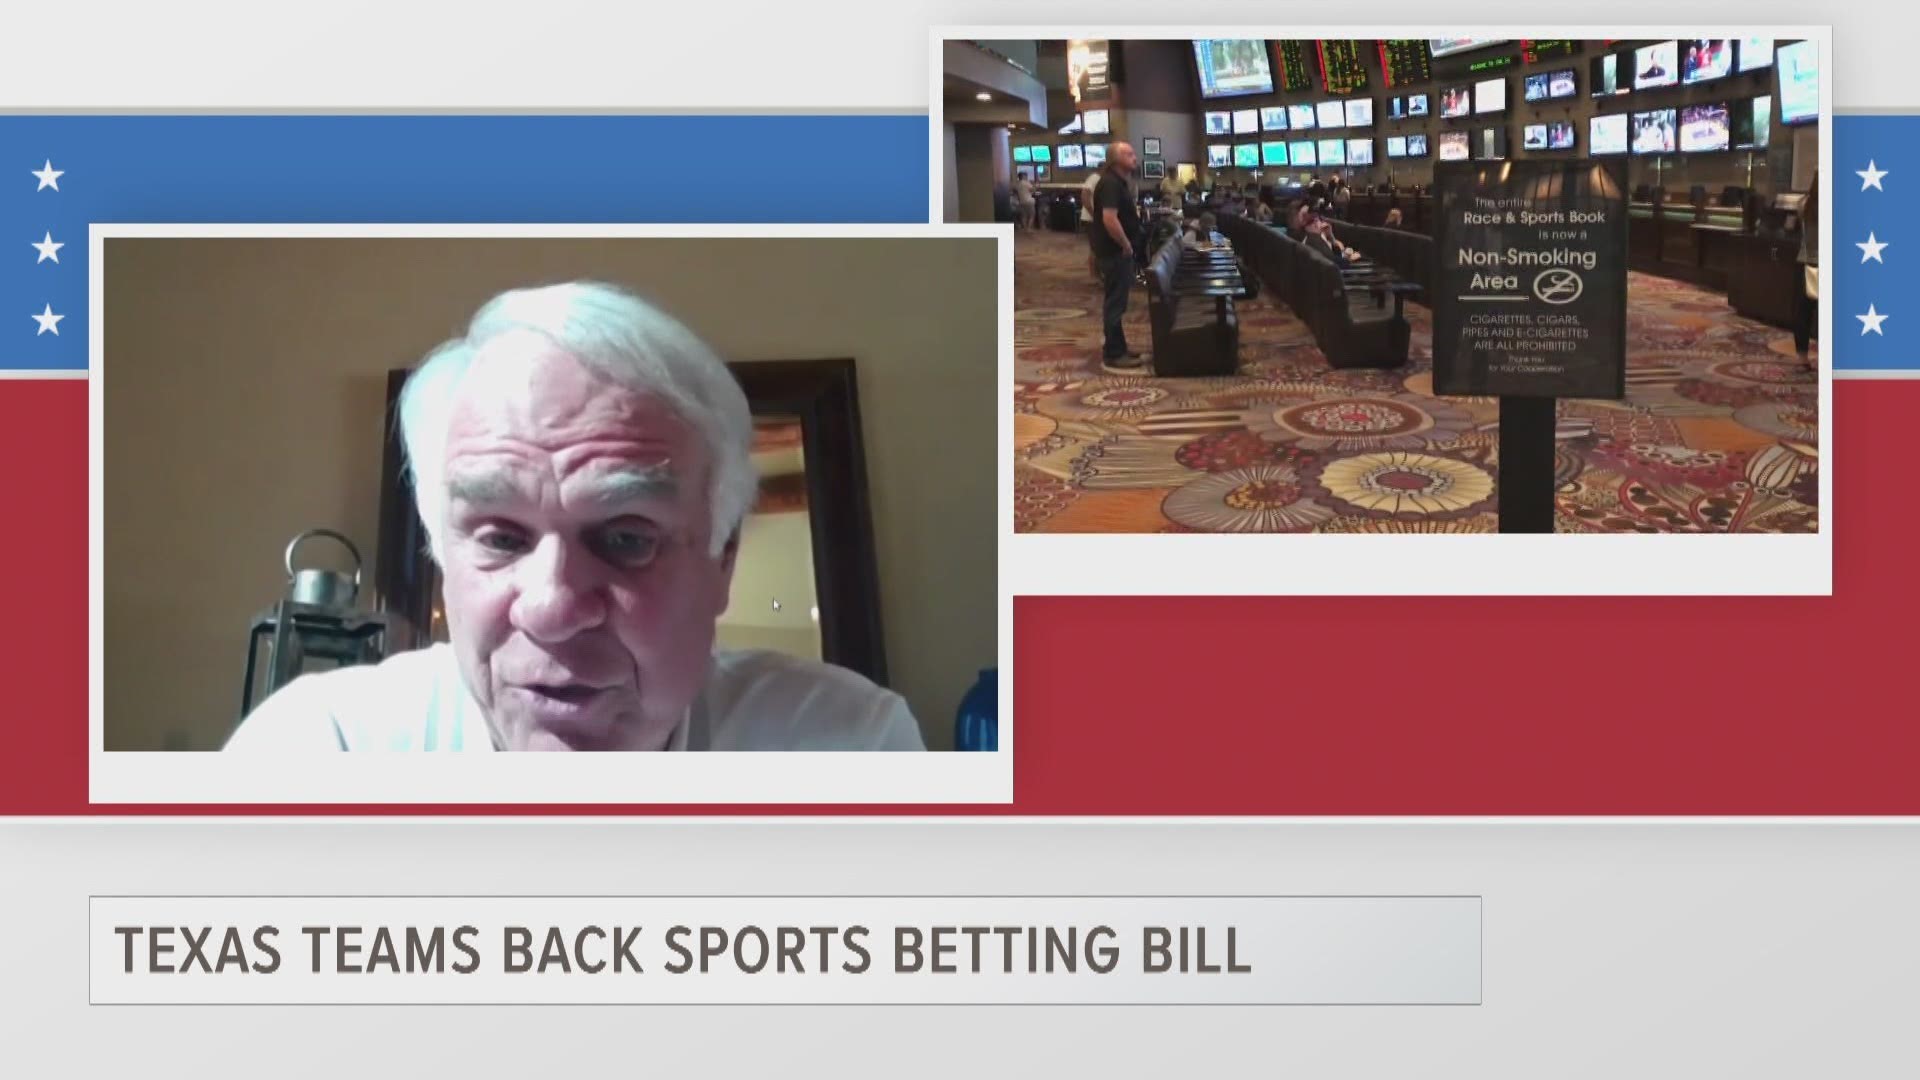 Jim Lites, Chairman of the Dallas Stars, explains why the Stars and all other major pro sports teams in Texas back a bill to legalize sports betting